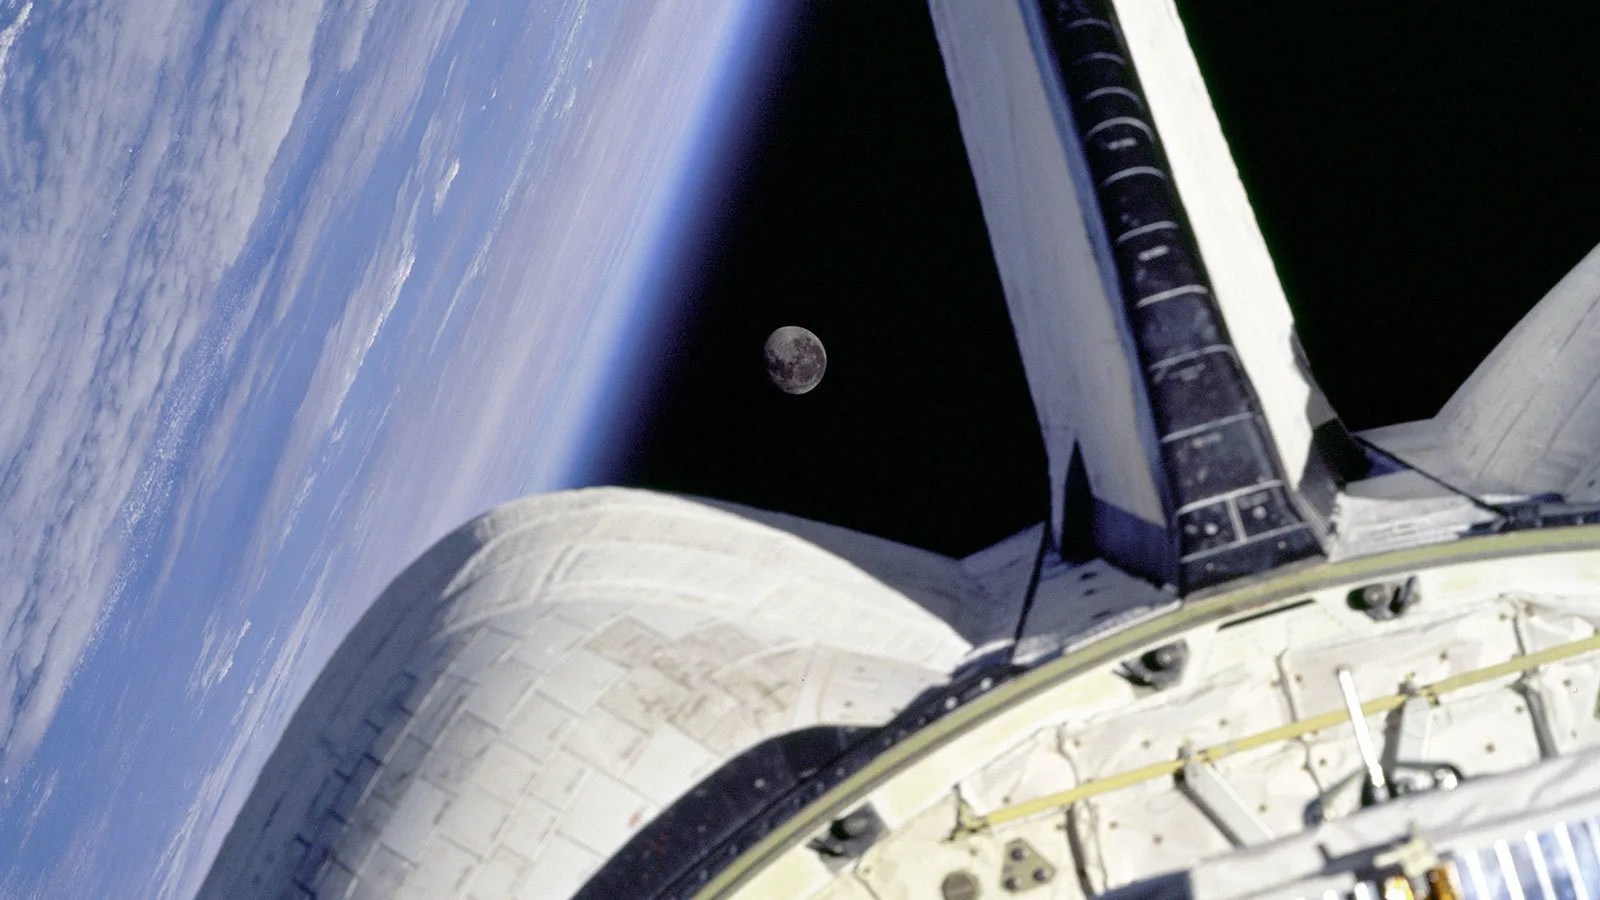 Earth and the Moon as seen over the tail and engines of the Space Shuttle Discovery in orbit.